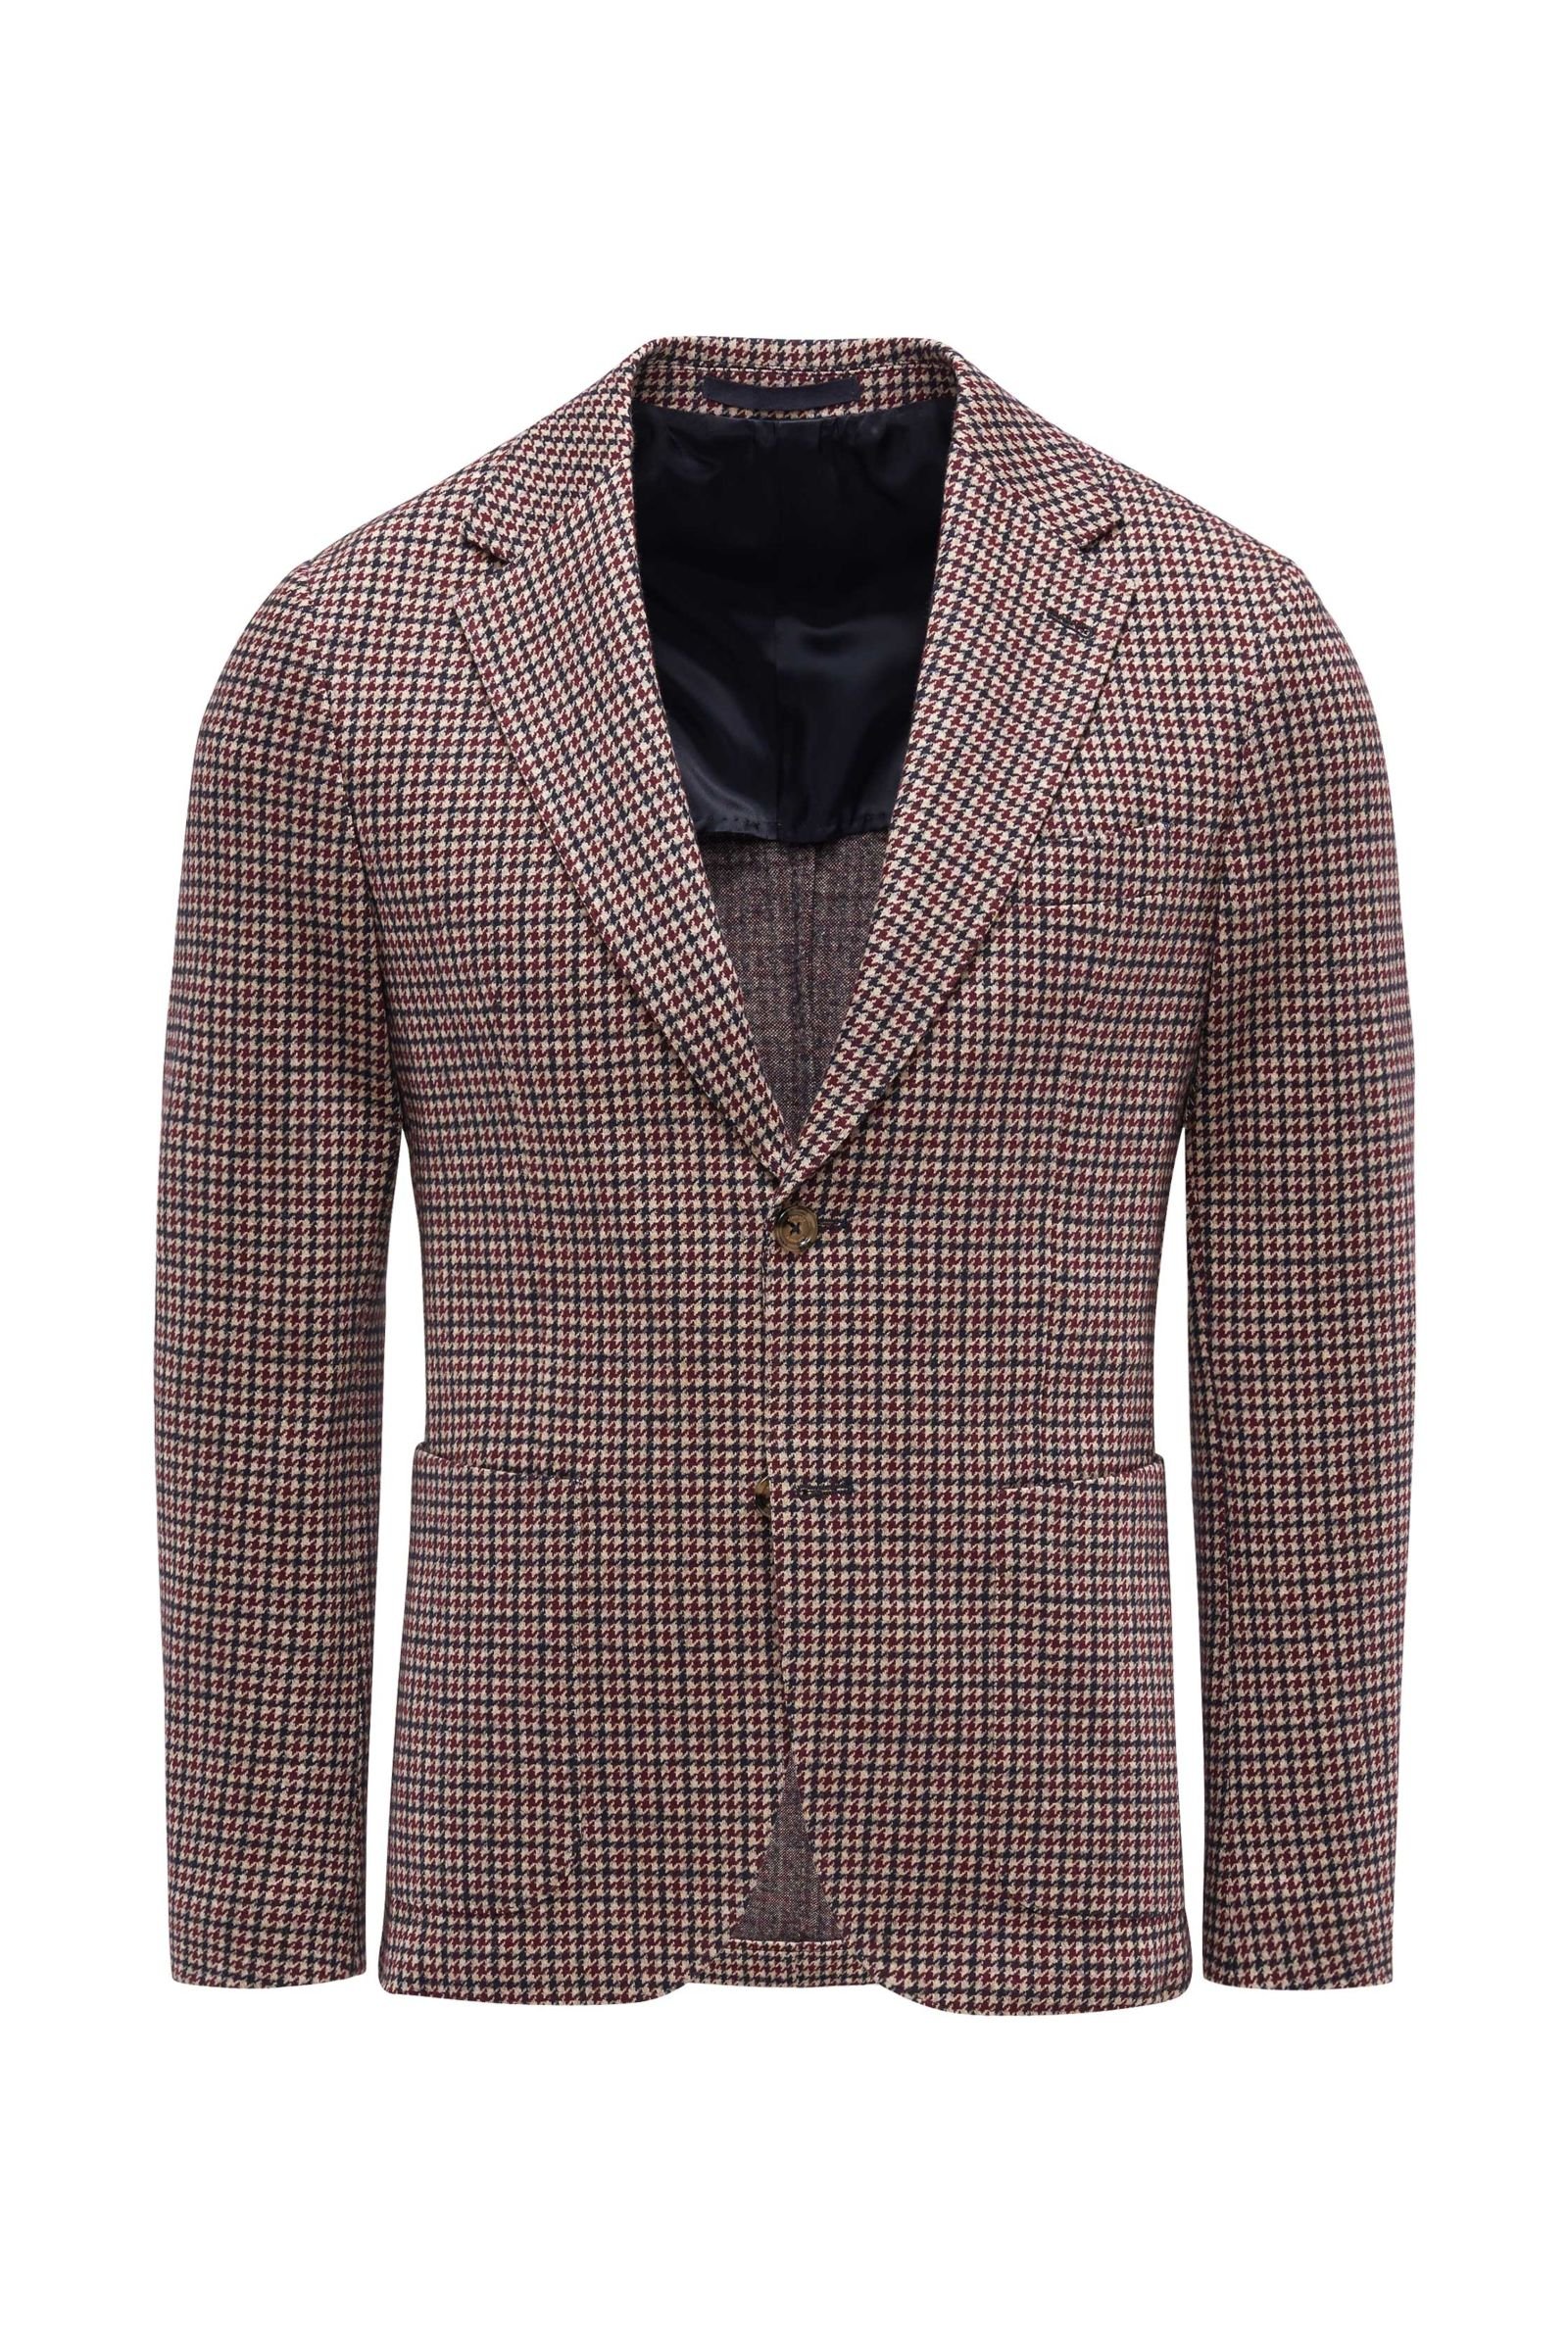 Jersey smart-casual jacket 'Athletic Fit' beige/burgundy checked